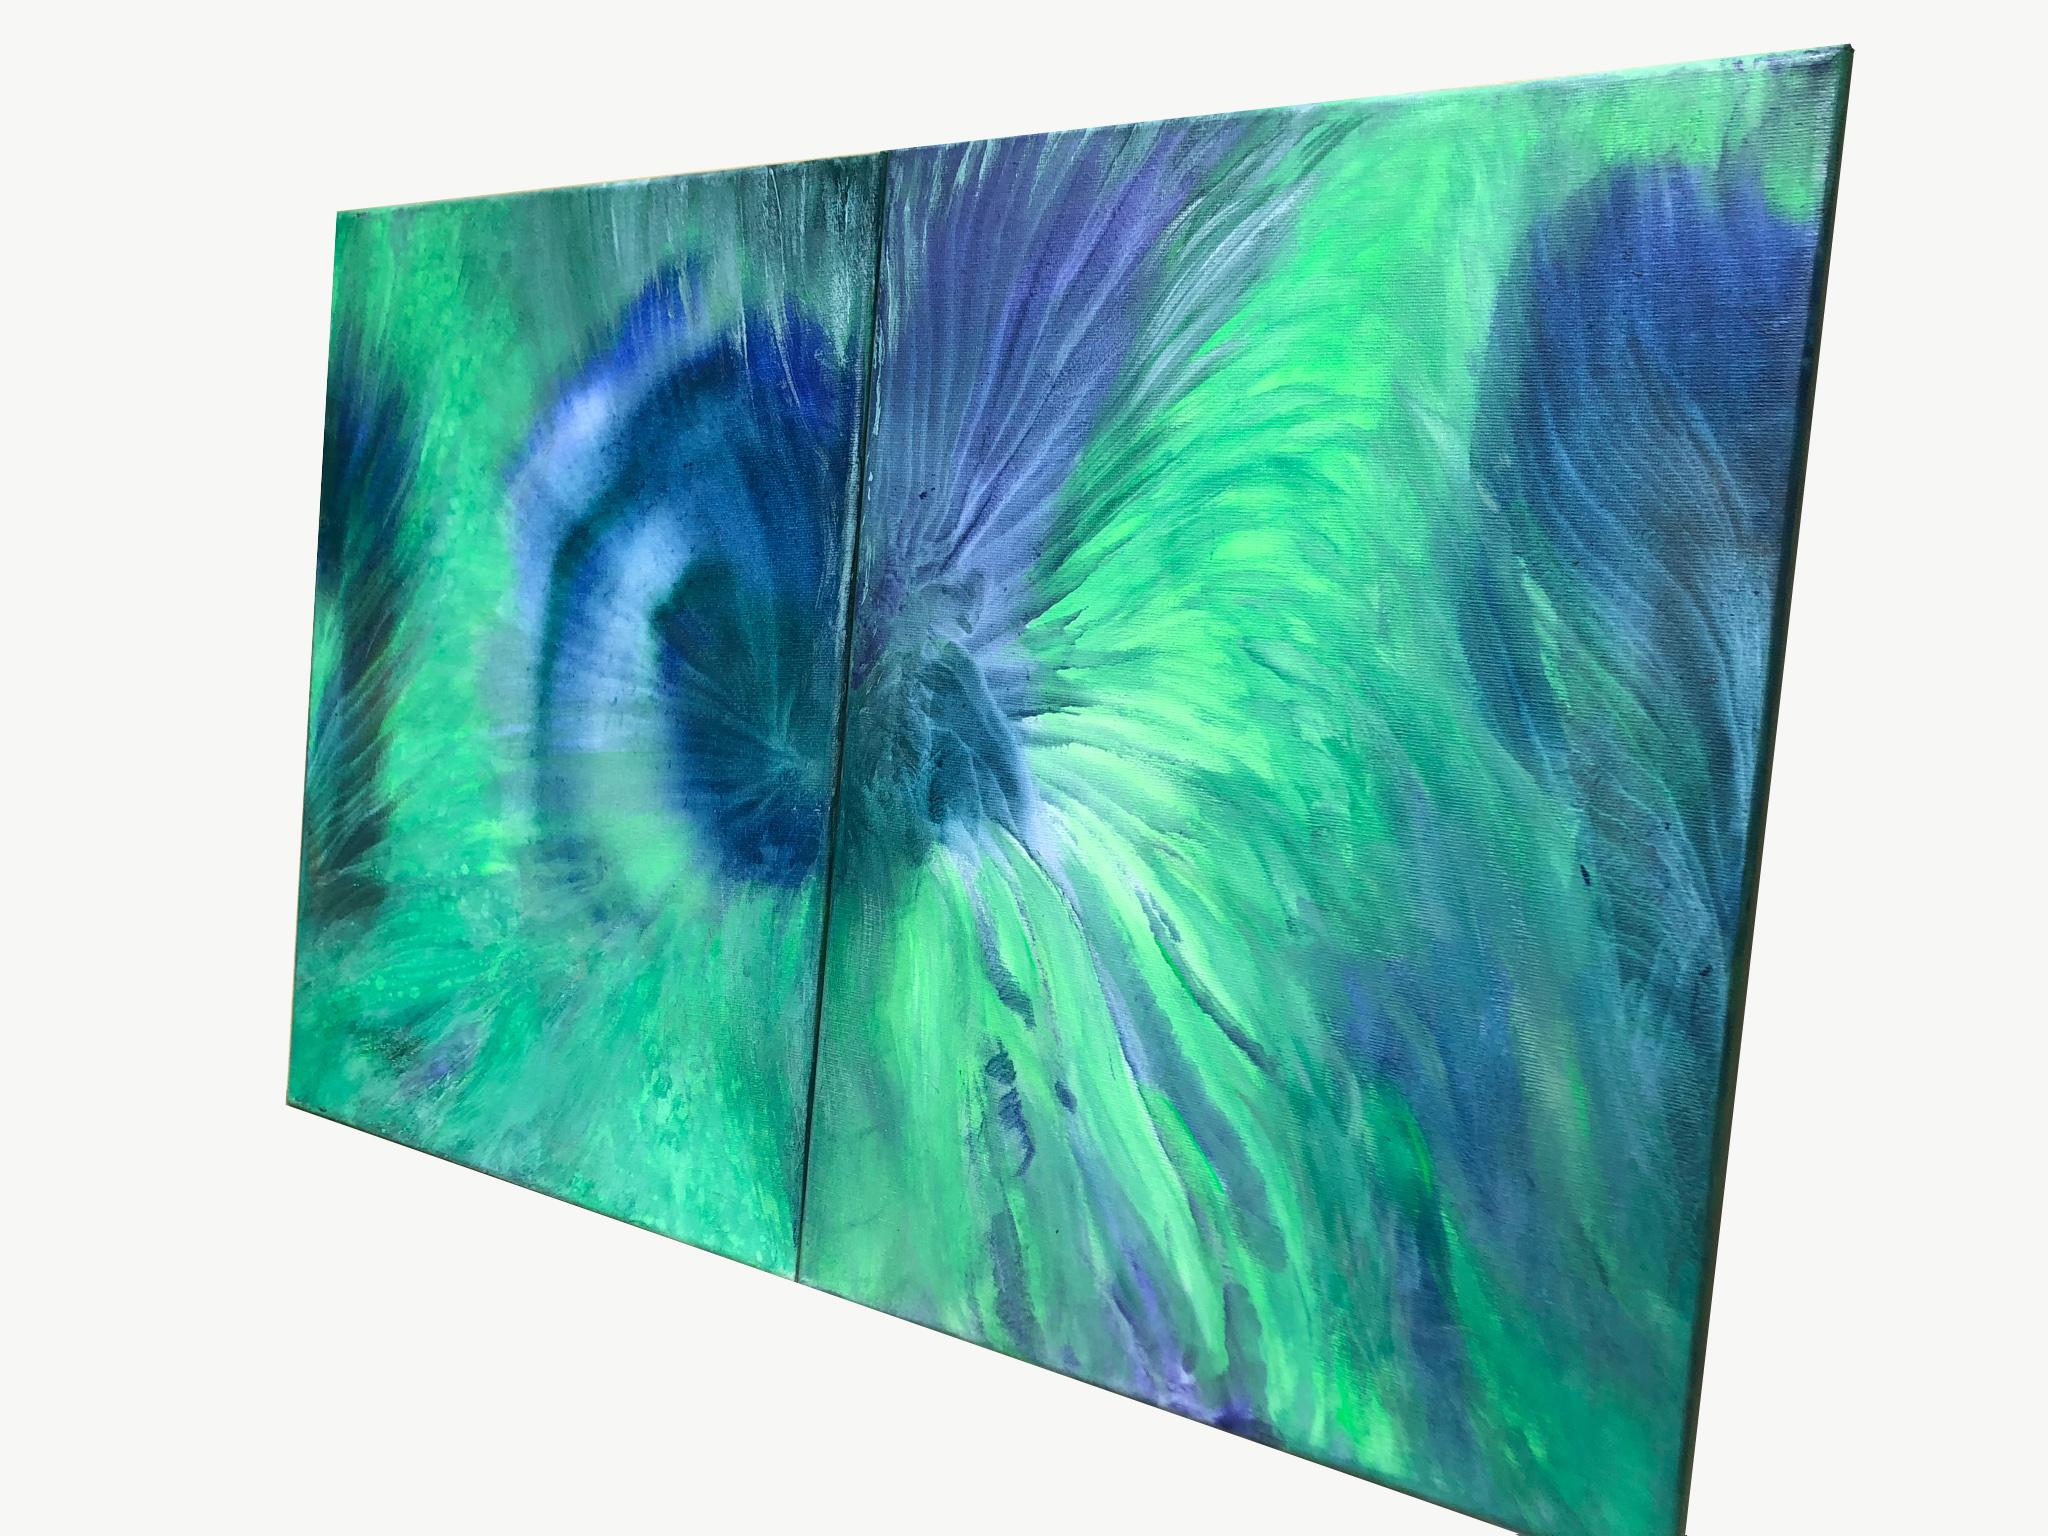 Diptych - Contemporary art 21st century - 2 paintings on canvas - blue, green - Green Abstract Painting by Volodymyr Zayichenko